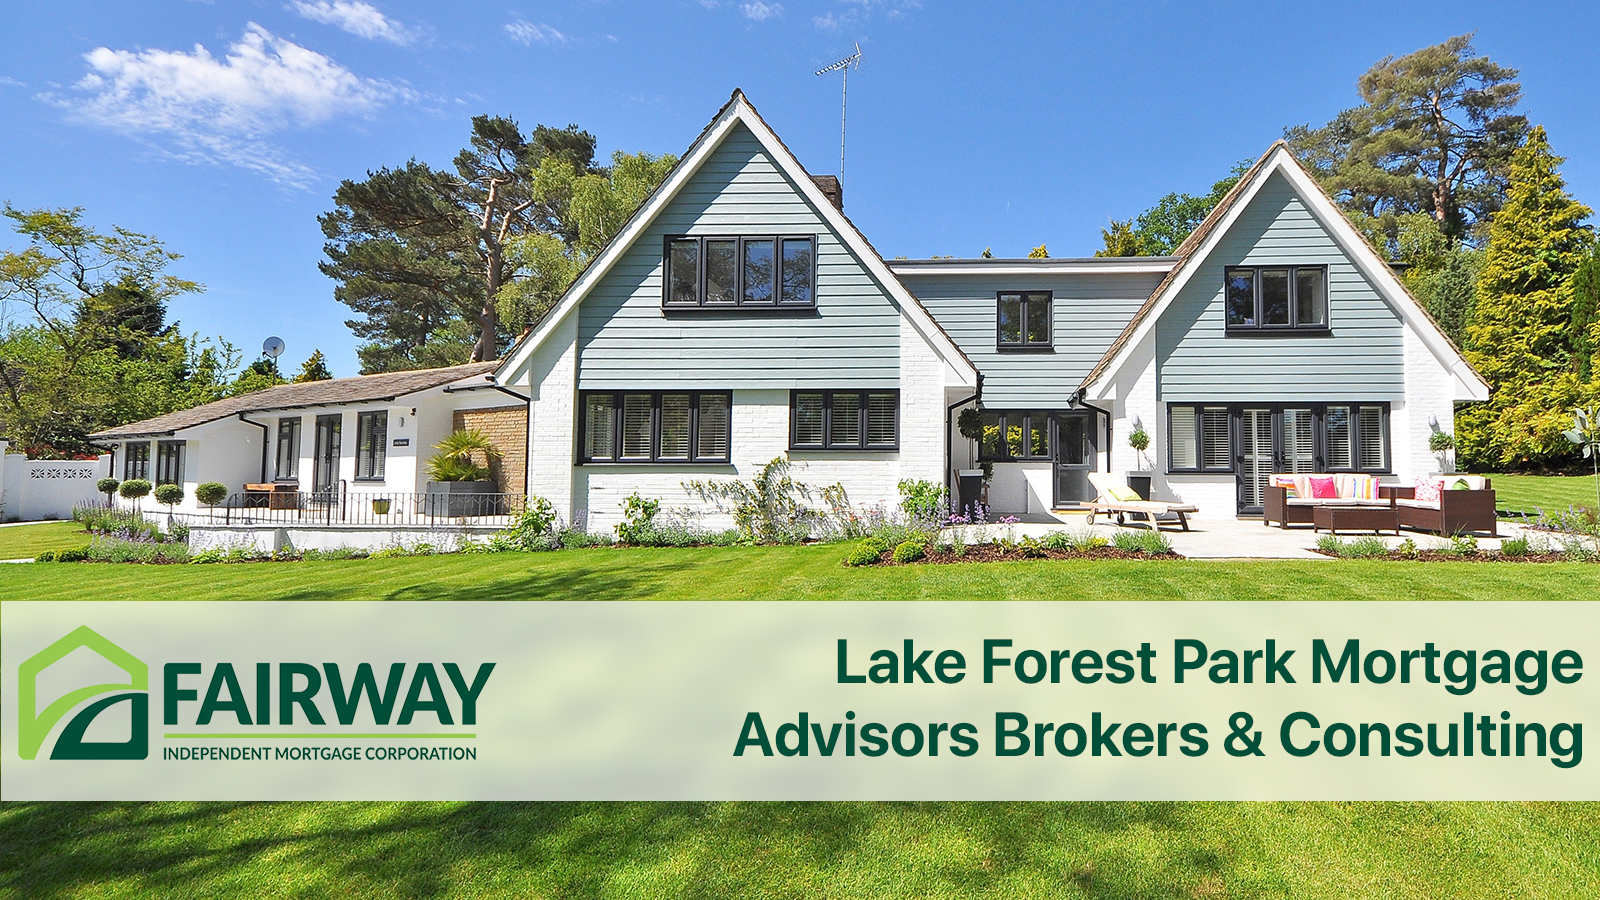 lake Forest Park Mortgage Advisors, Brokers and Consulting